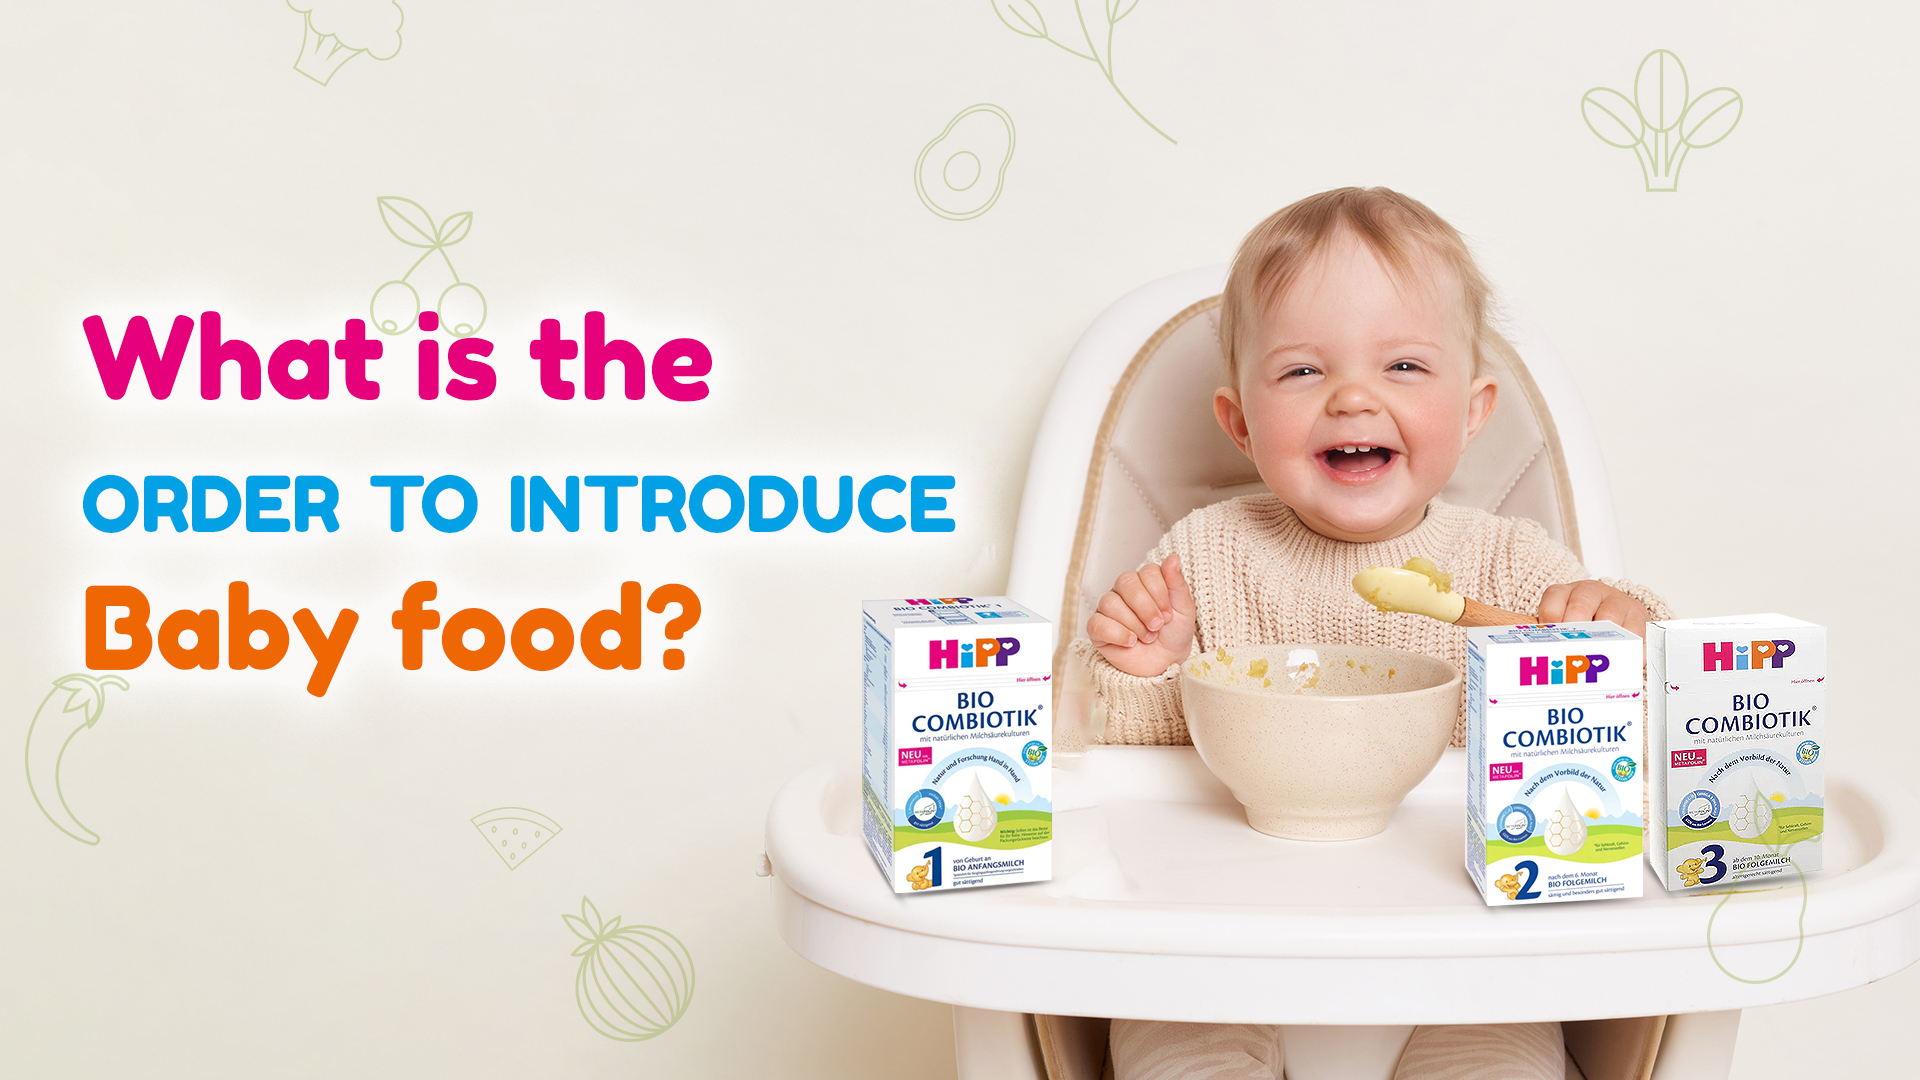 WHAT IS THE BEST ORDER TO INTRODUCE BABY FOOD?